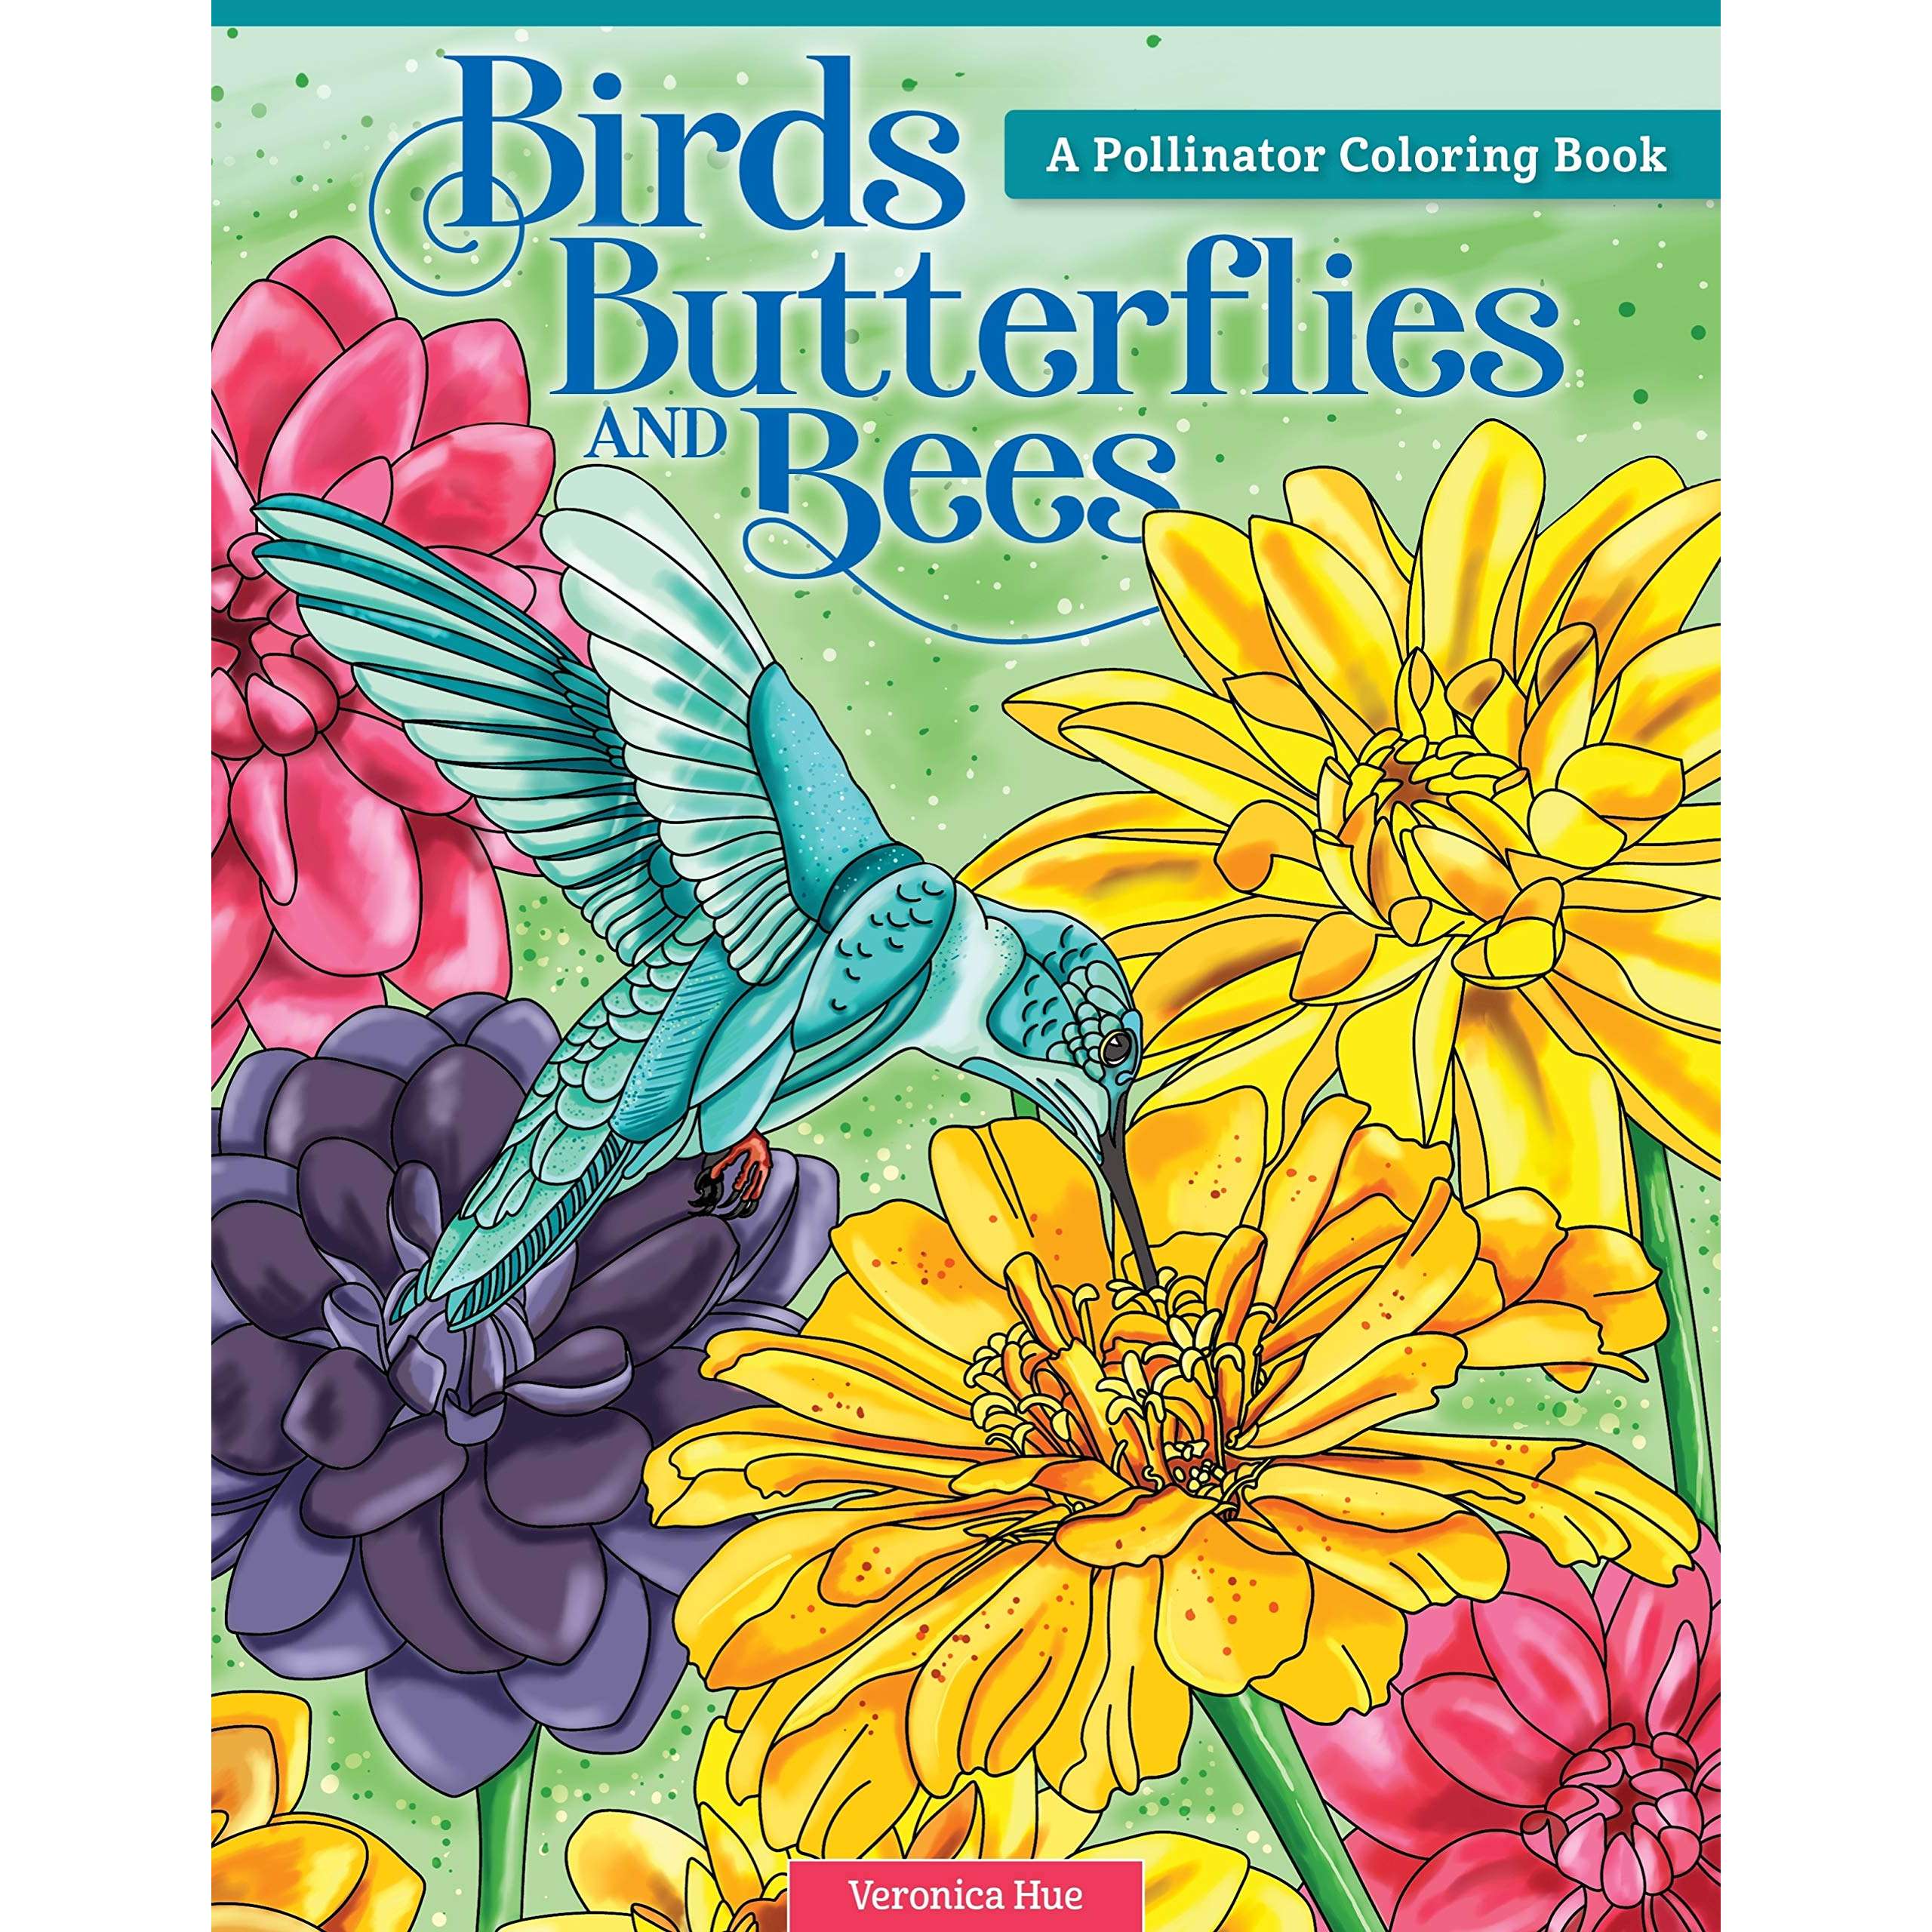 The Wonderful Butterflies and Flowers Coloring Book for Adults: Butterfly Coloring Book for Adults Relaxation, and Stress Relief - 50 Featuring Unique Butterfly Designs [Book]